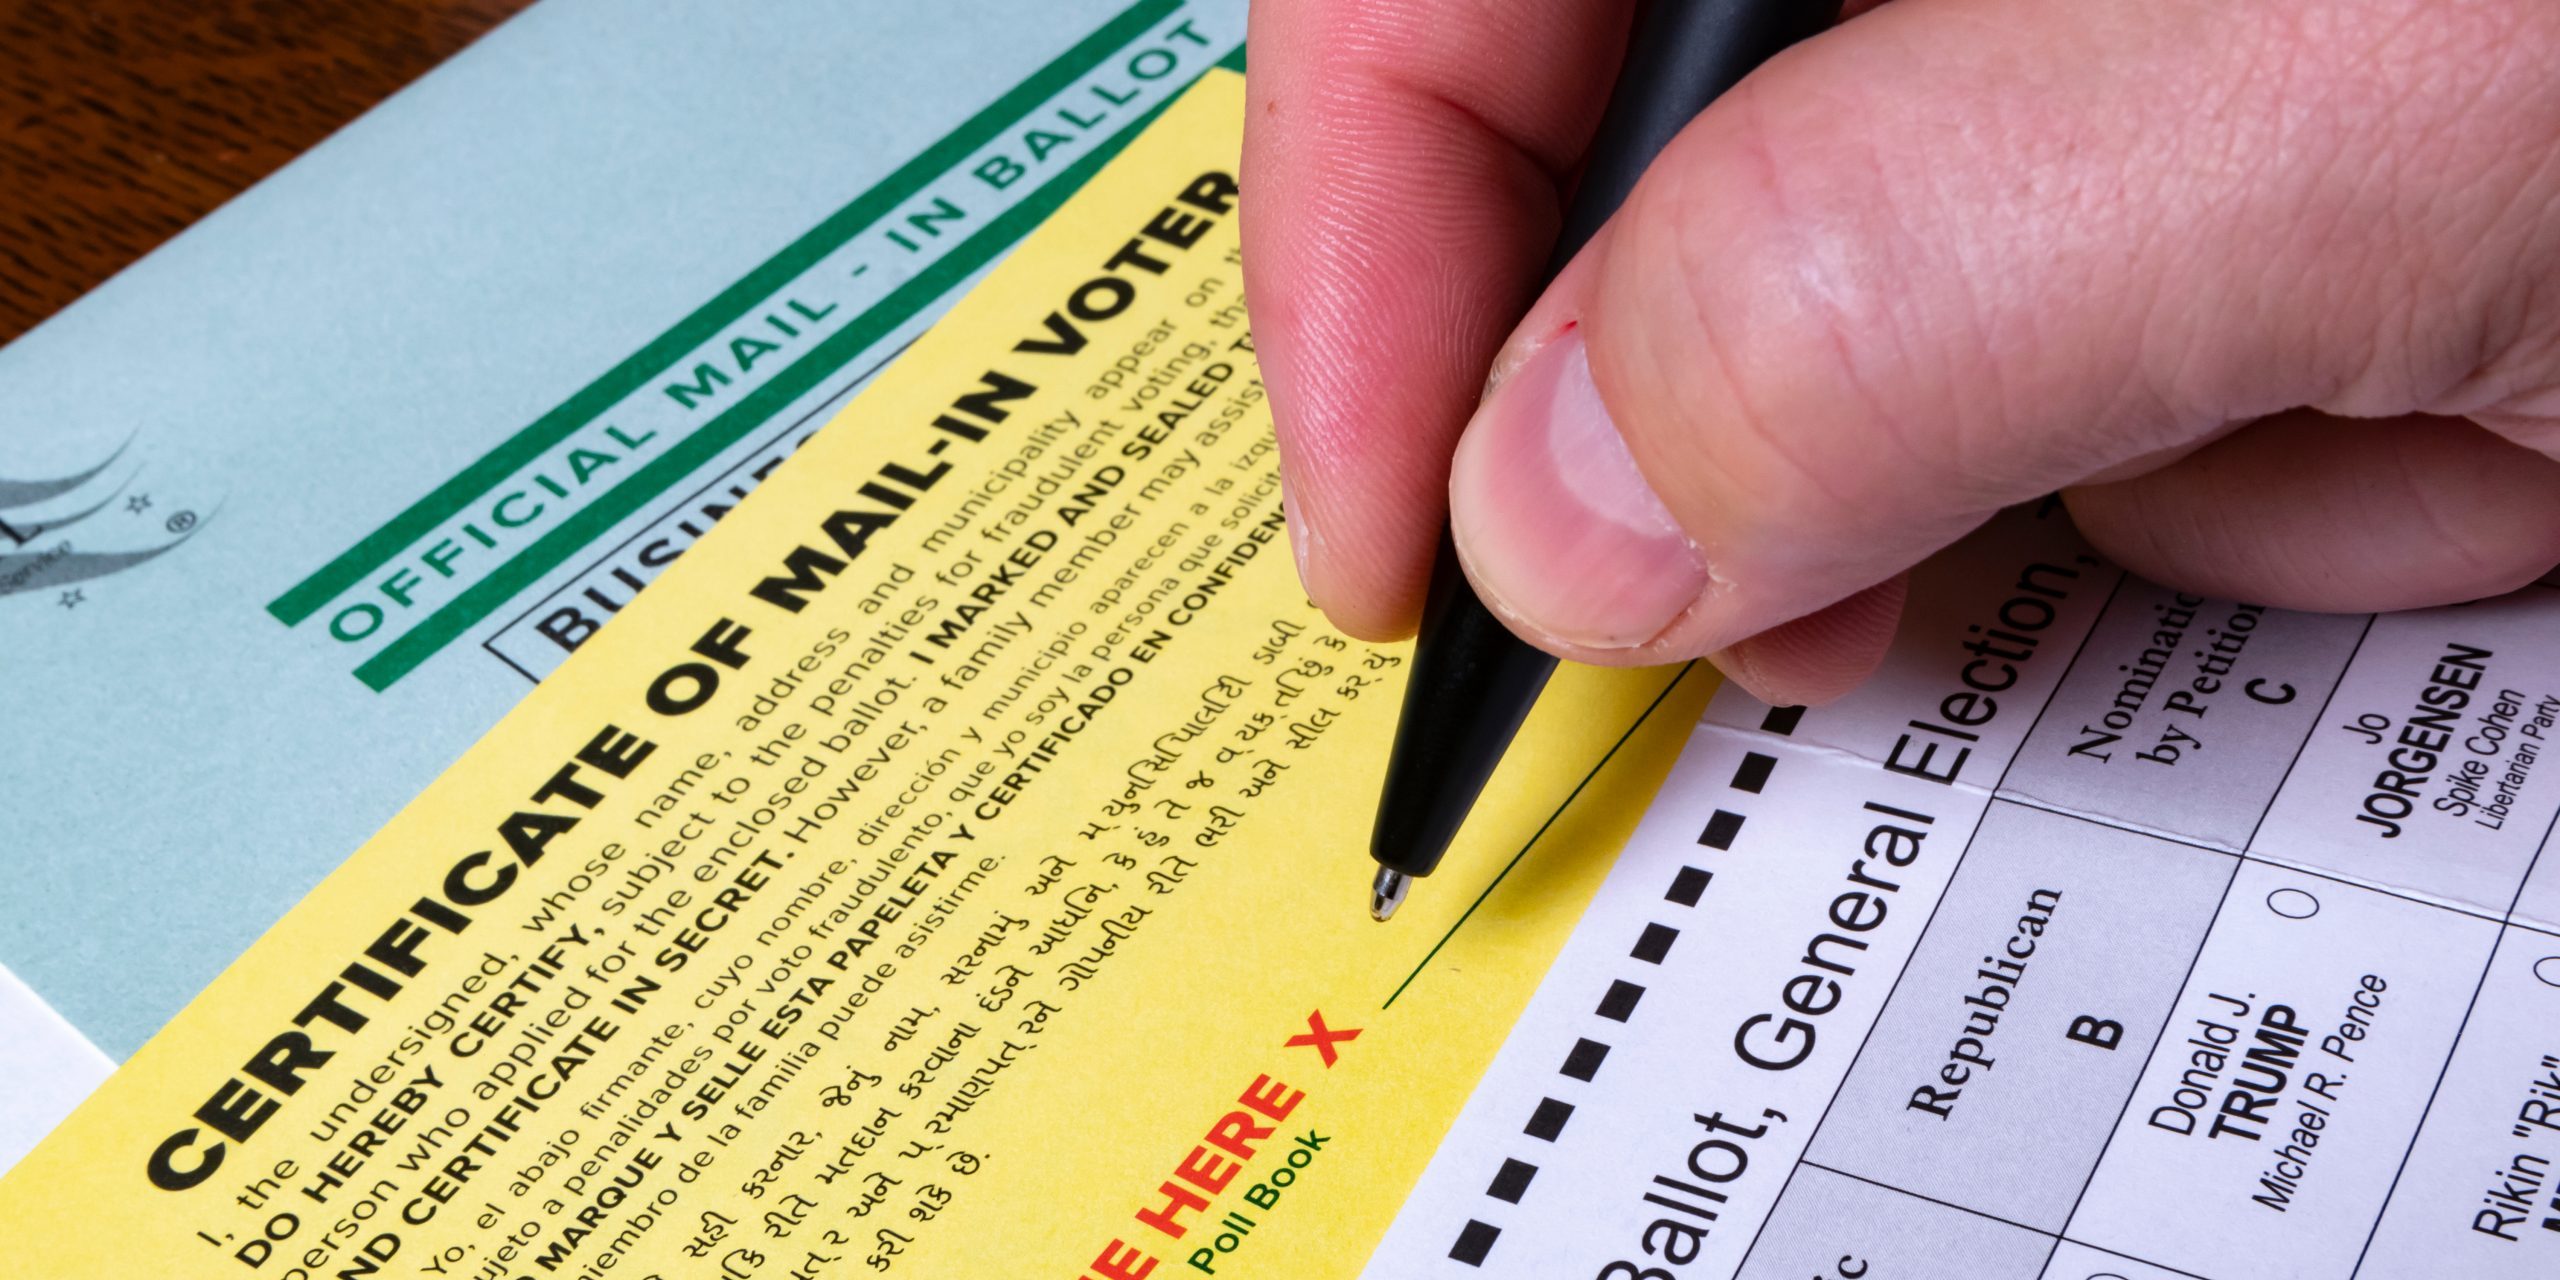 Are noncitizens voting in federal or state elections?